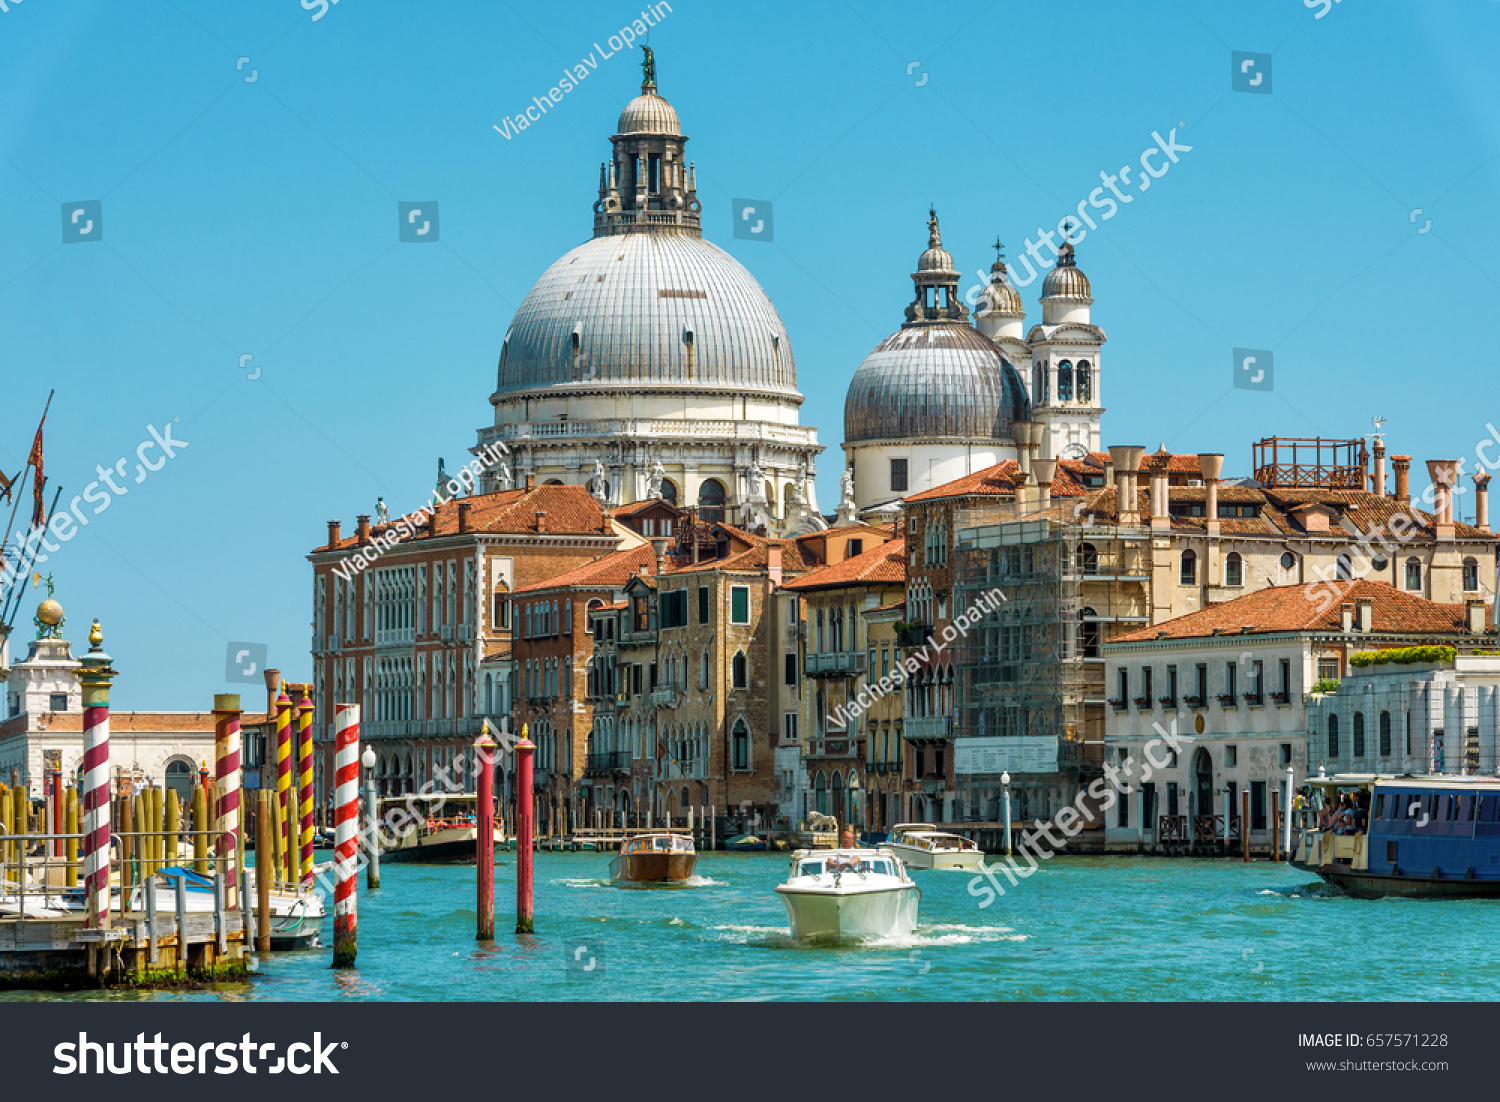 Water taxis and other tourist boats sail on the Grand Canal, Venice, Italy. Motor boats are the main transport in Venice. Nice panorama of Venice in summer. Romantic marine trip across sunny Venice. #657571228